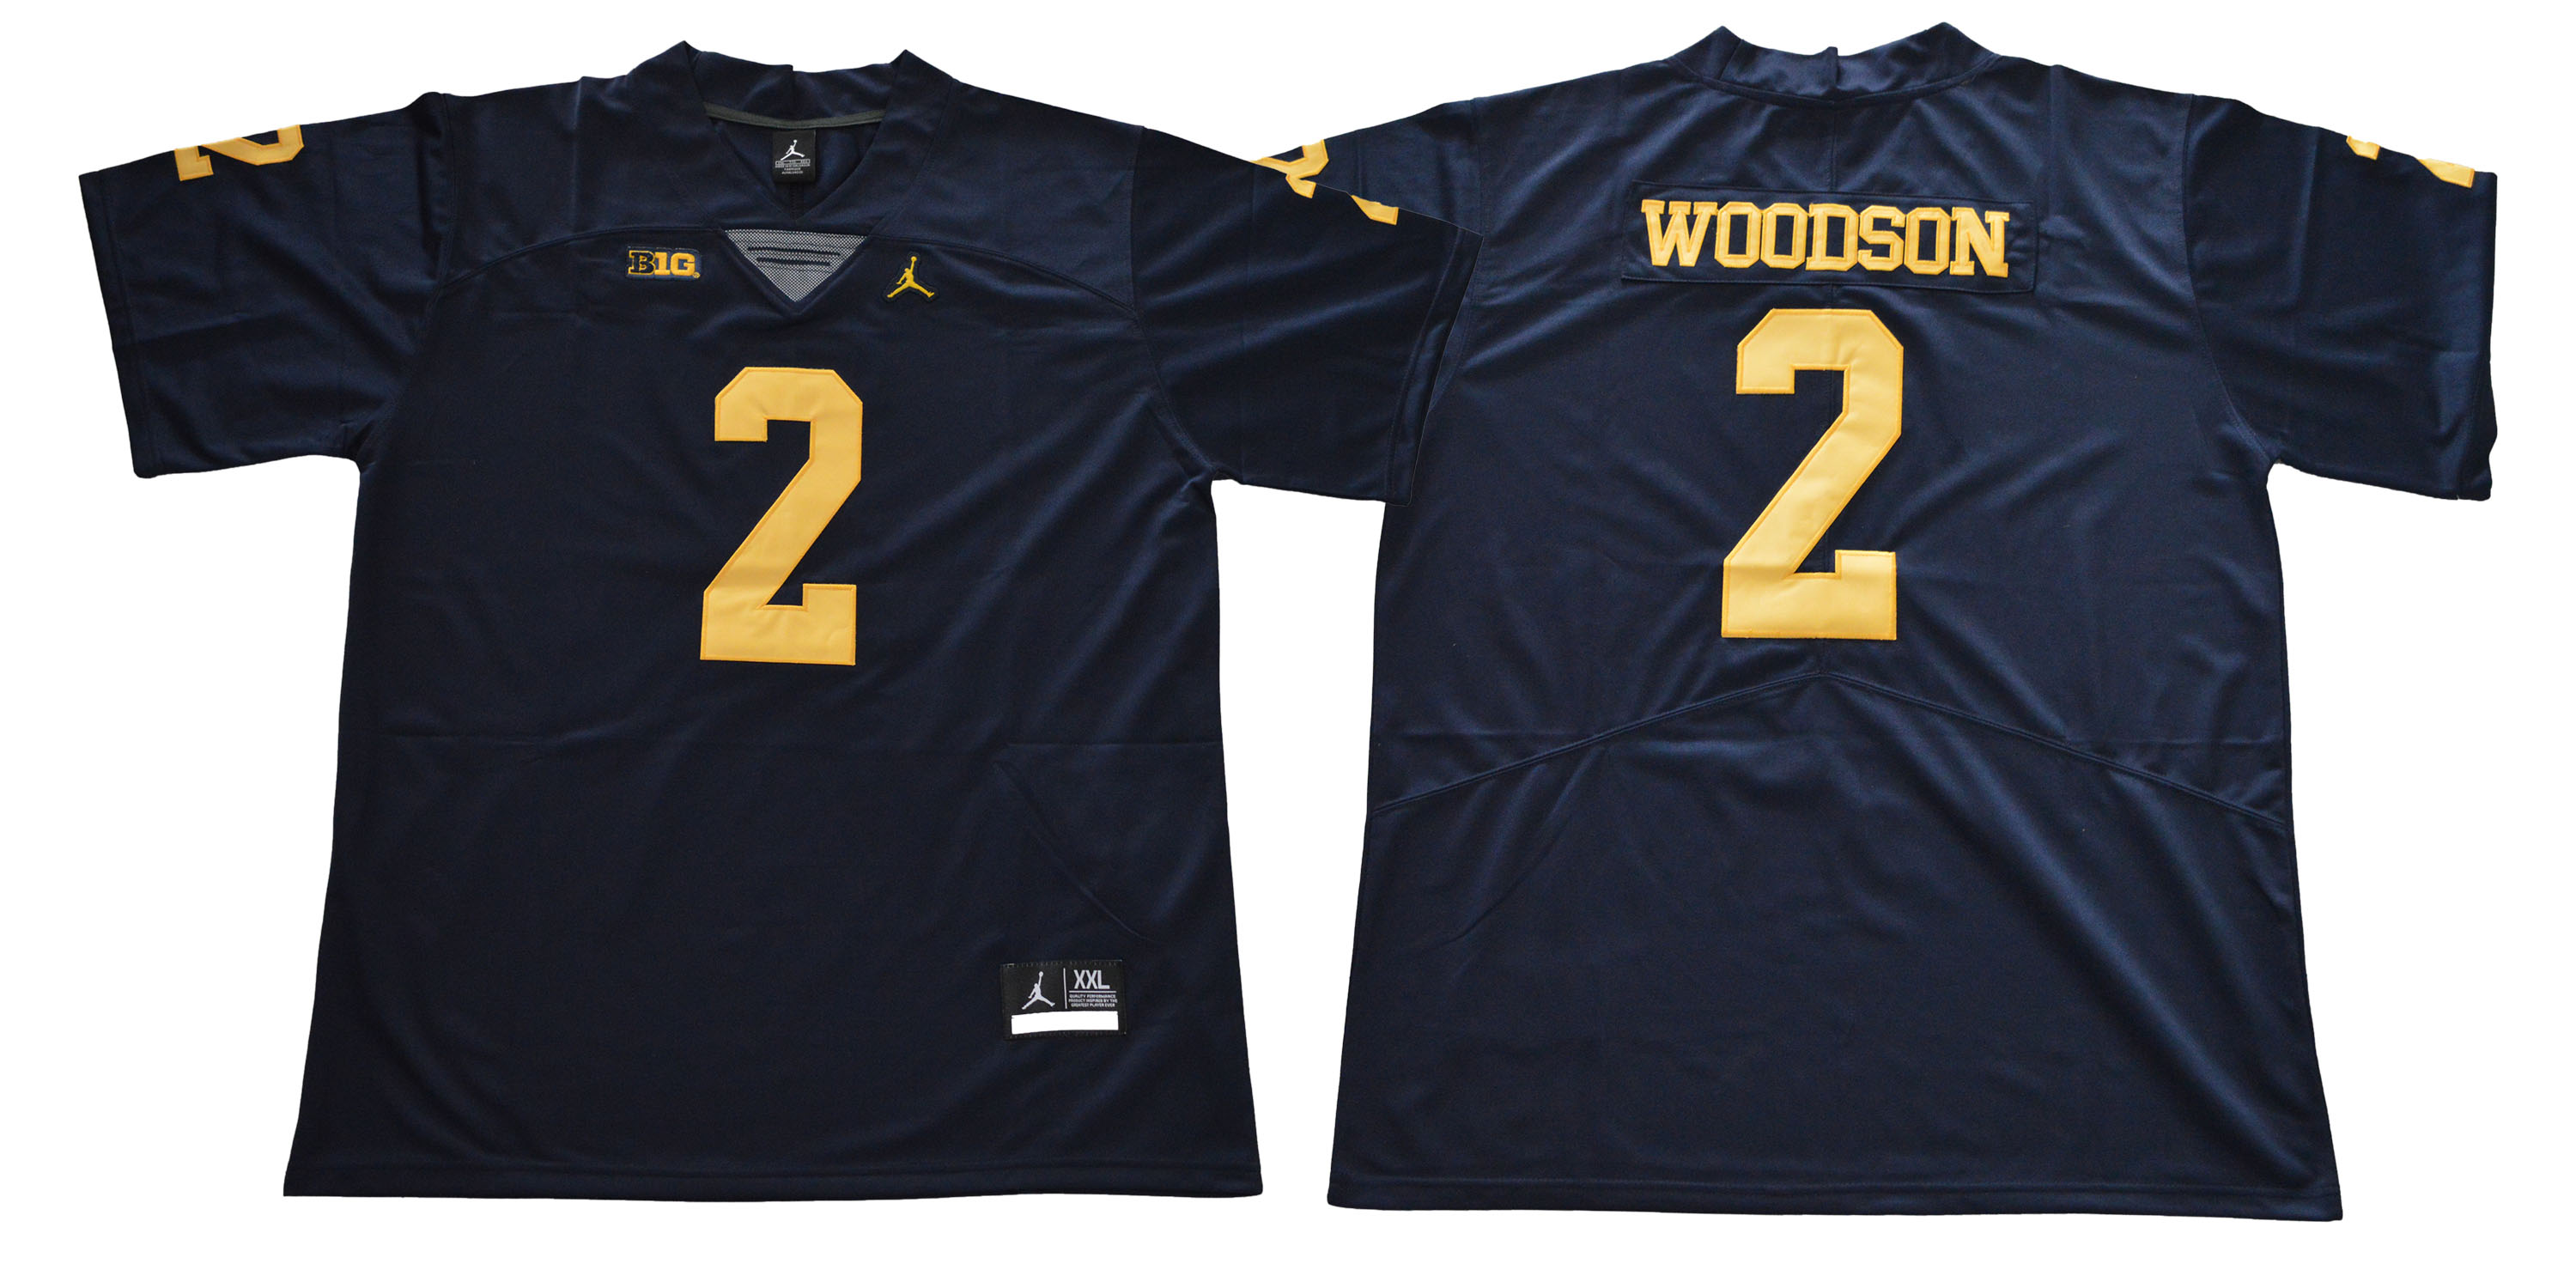 Michigan Wolverines 2 Charles Woodson Navy College Football Jersey